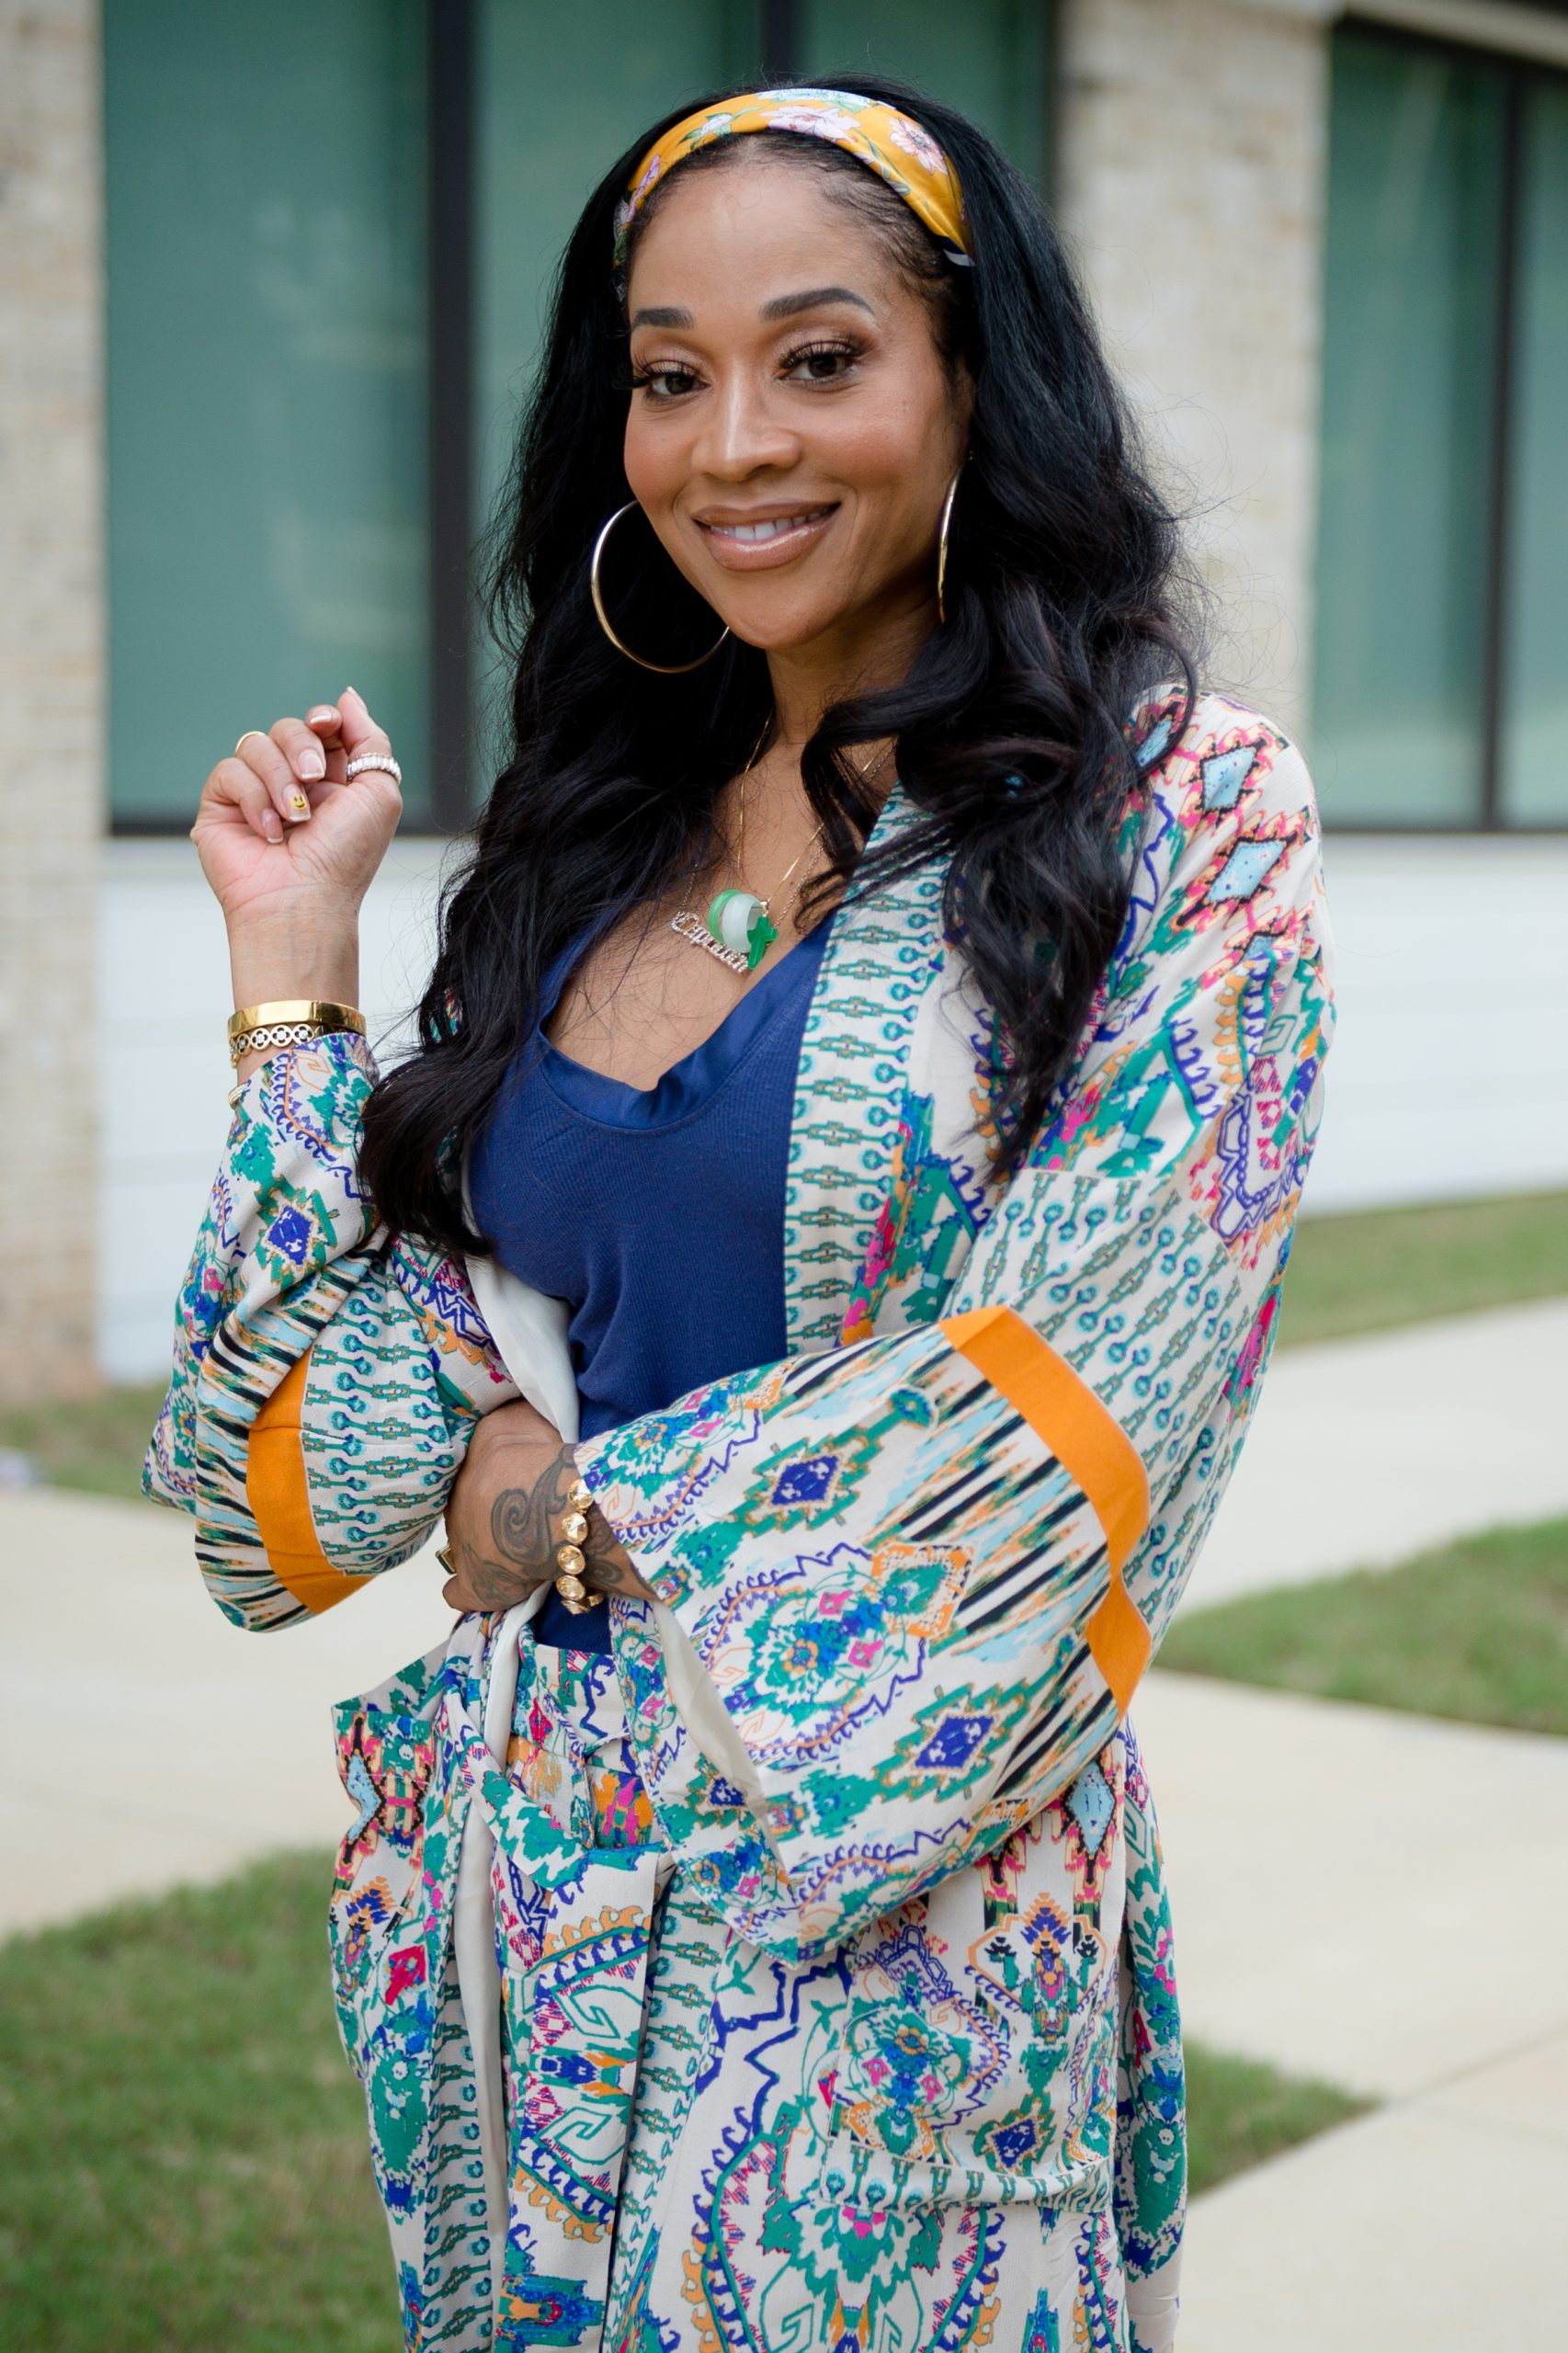 'I'm Happy': Mimi Faust On The Work She Did To Finally Be Drama-Free